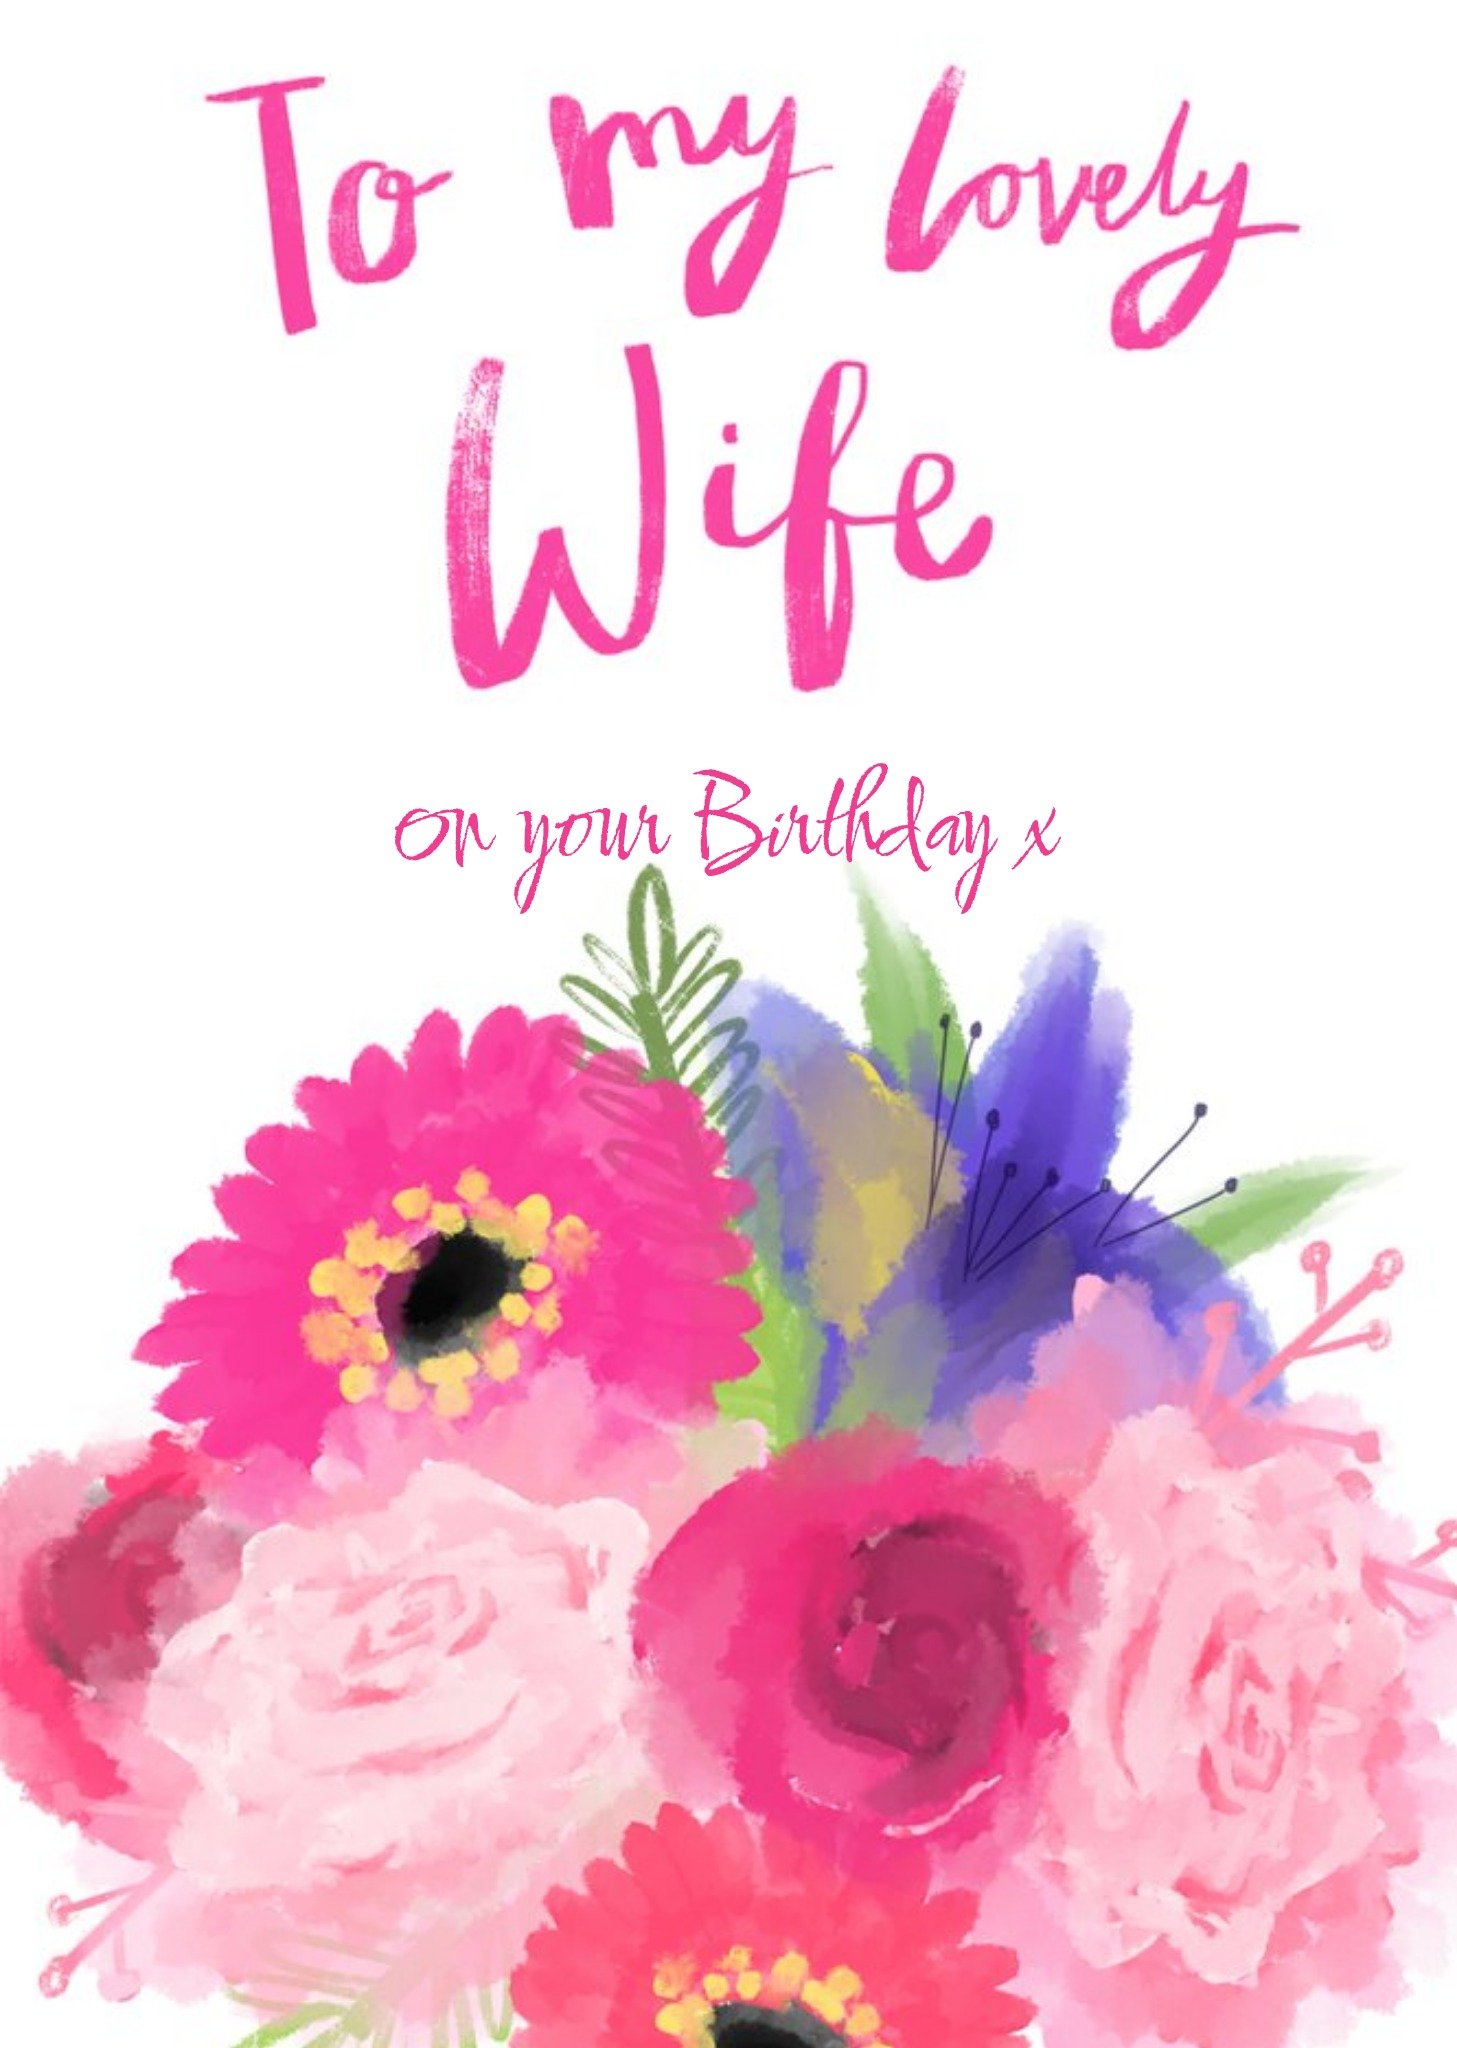 Moonpig Bright Pink Watercolour Flowers Lovely Wife On Your Birthday Card, Large